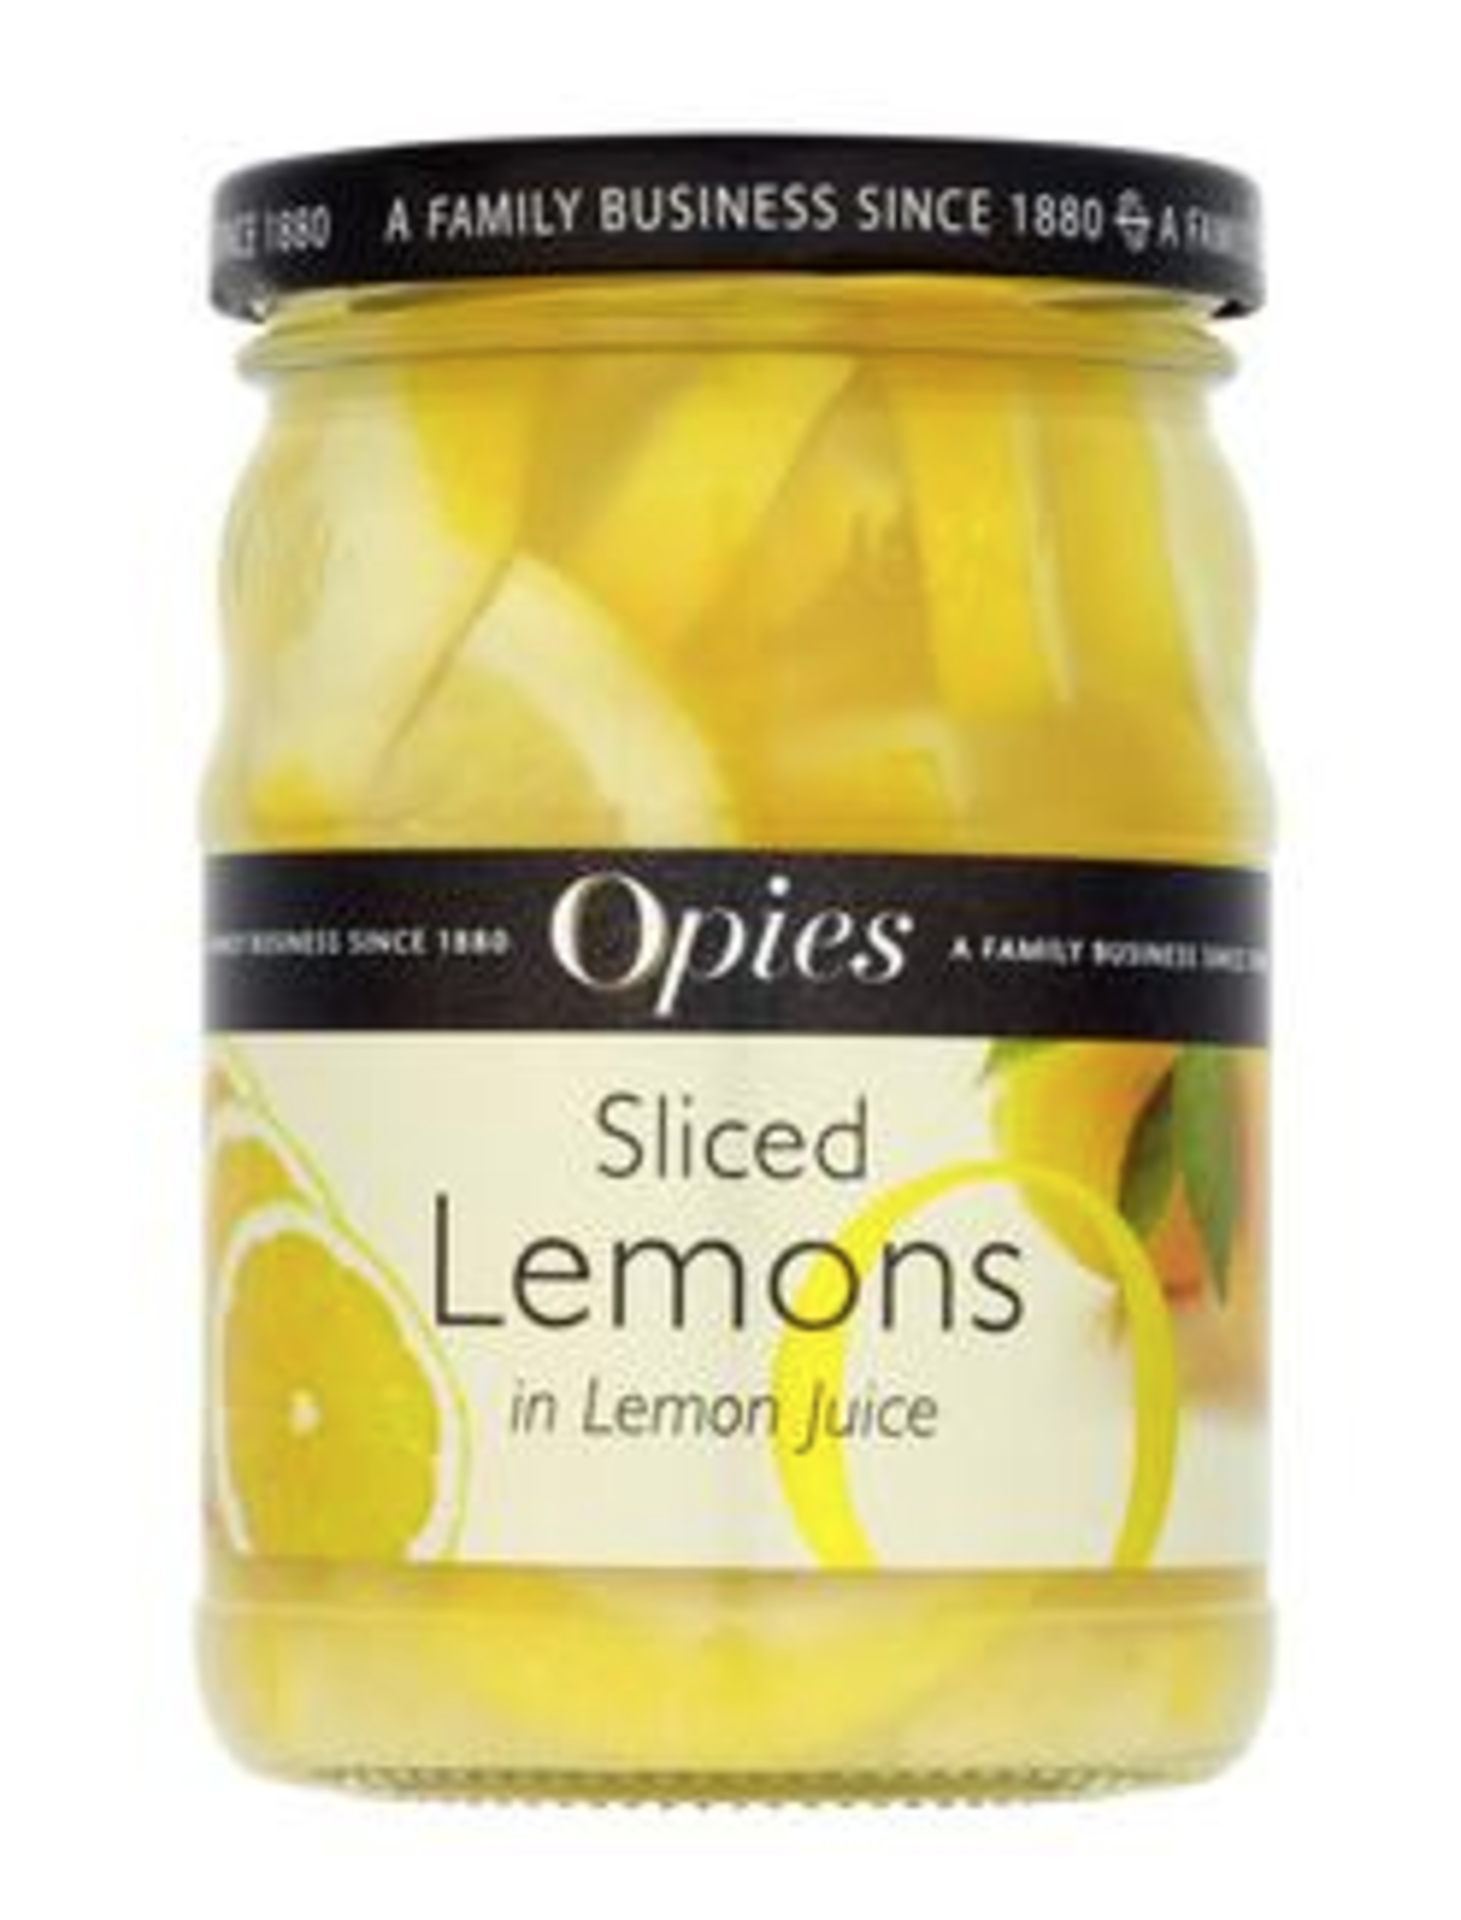 RRP £538 (Approx Count 69)(E62) 17 x Opies Sliced Lemons, 350g - BBE (06/2023) spW14a6360b 12 x